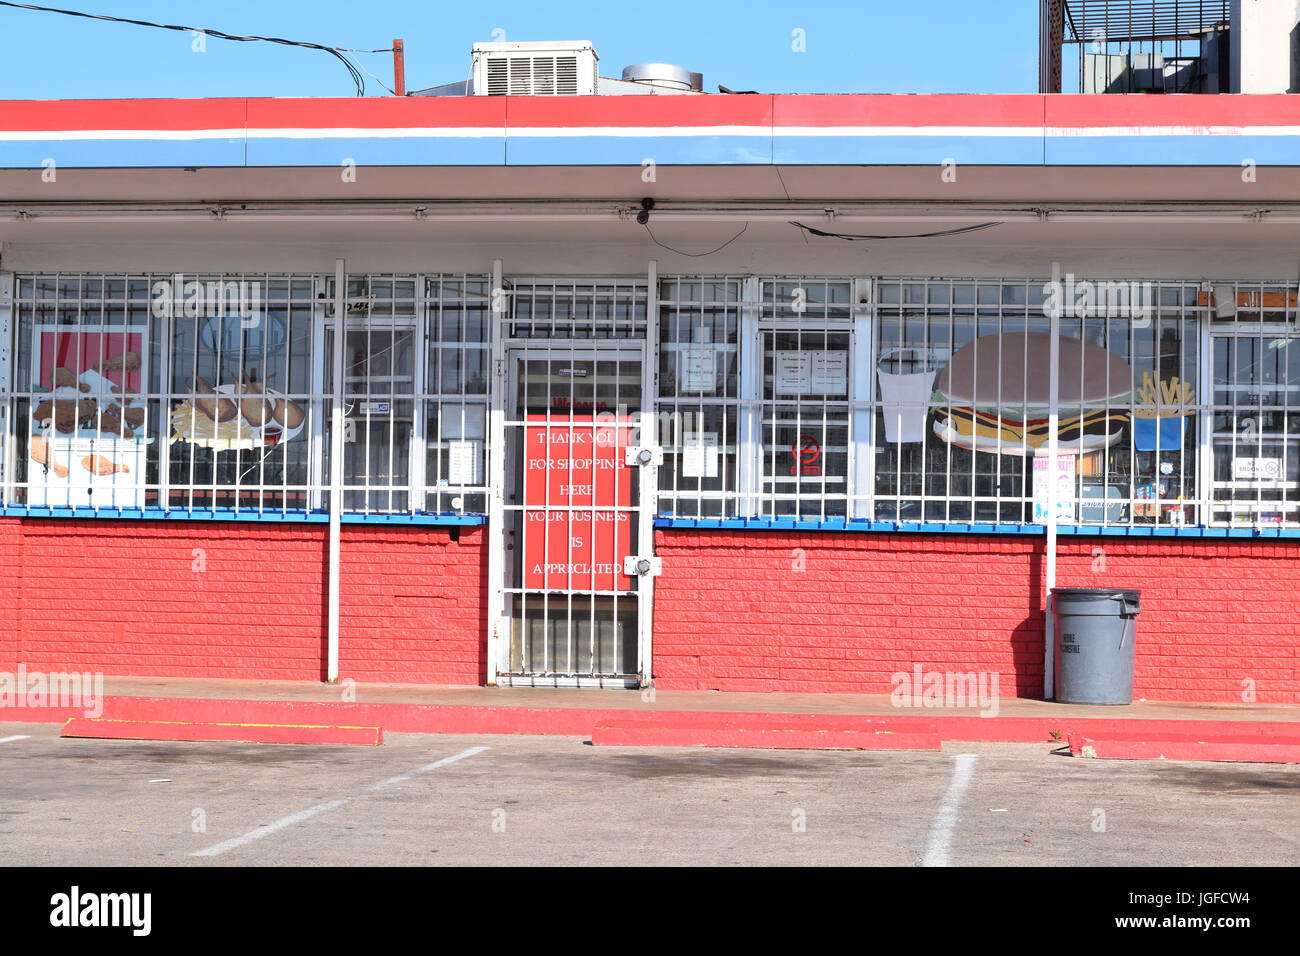 Bars on windows of a fast food restaurant in the high crime area of South Dallas, Texas Stock Photo